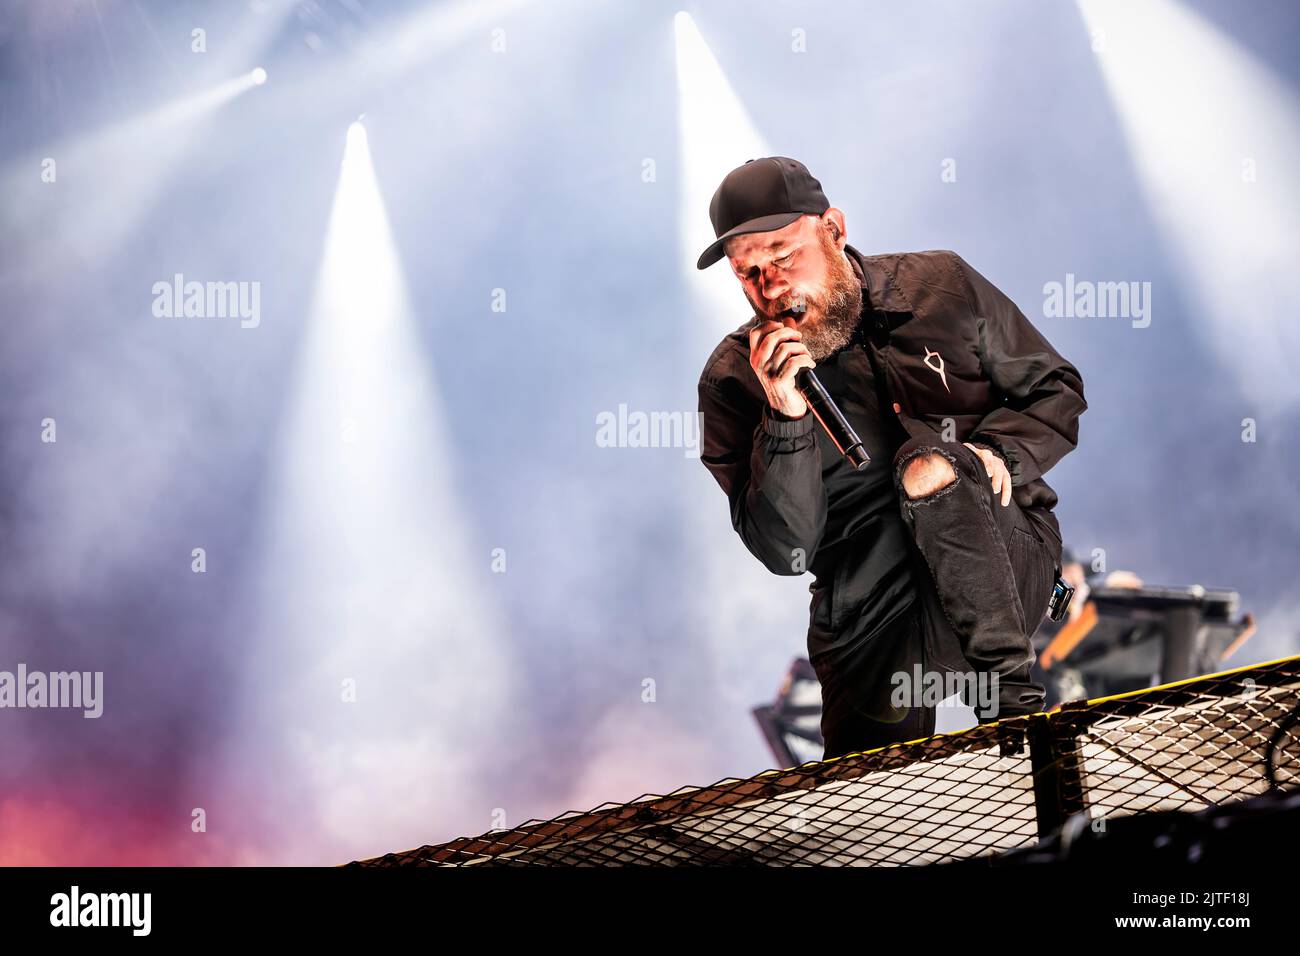 Solvesborg, Sweden. 10th, June 2022. The Swedish heavy metal band In Flames performs a live concert during the Swedish music festival Sweden Rock Festival 2022 in Solvesborg. Here vocalist Anders Friden is seen live on stage. (Photo credit: Gonzales Photo - Terje Dokken). Stock Photo